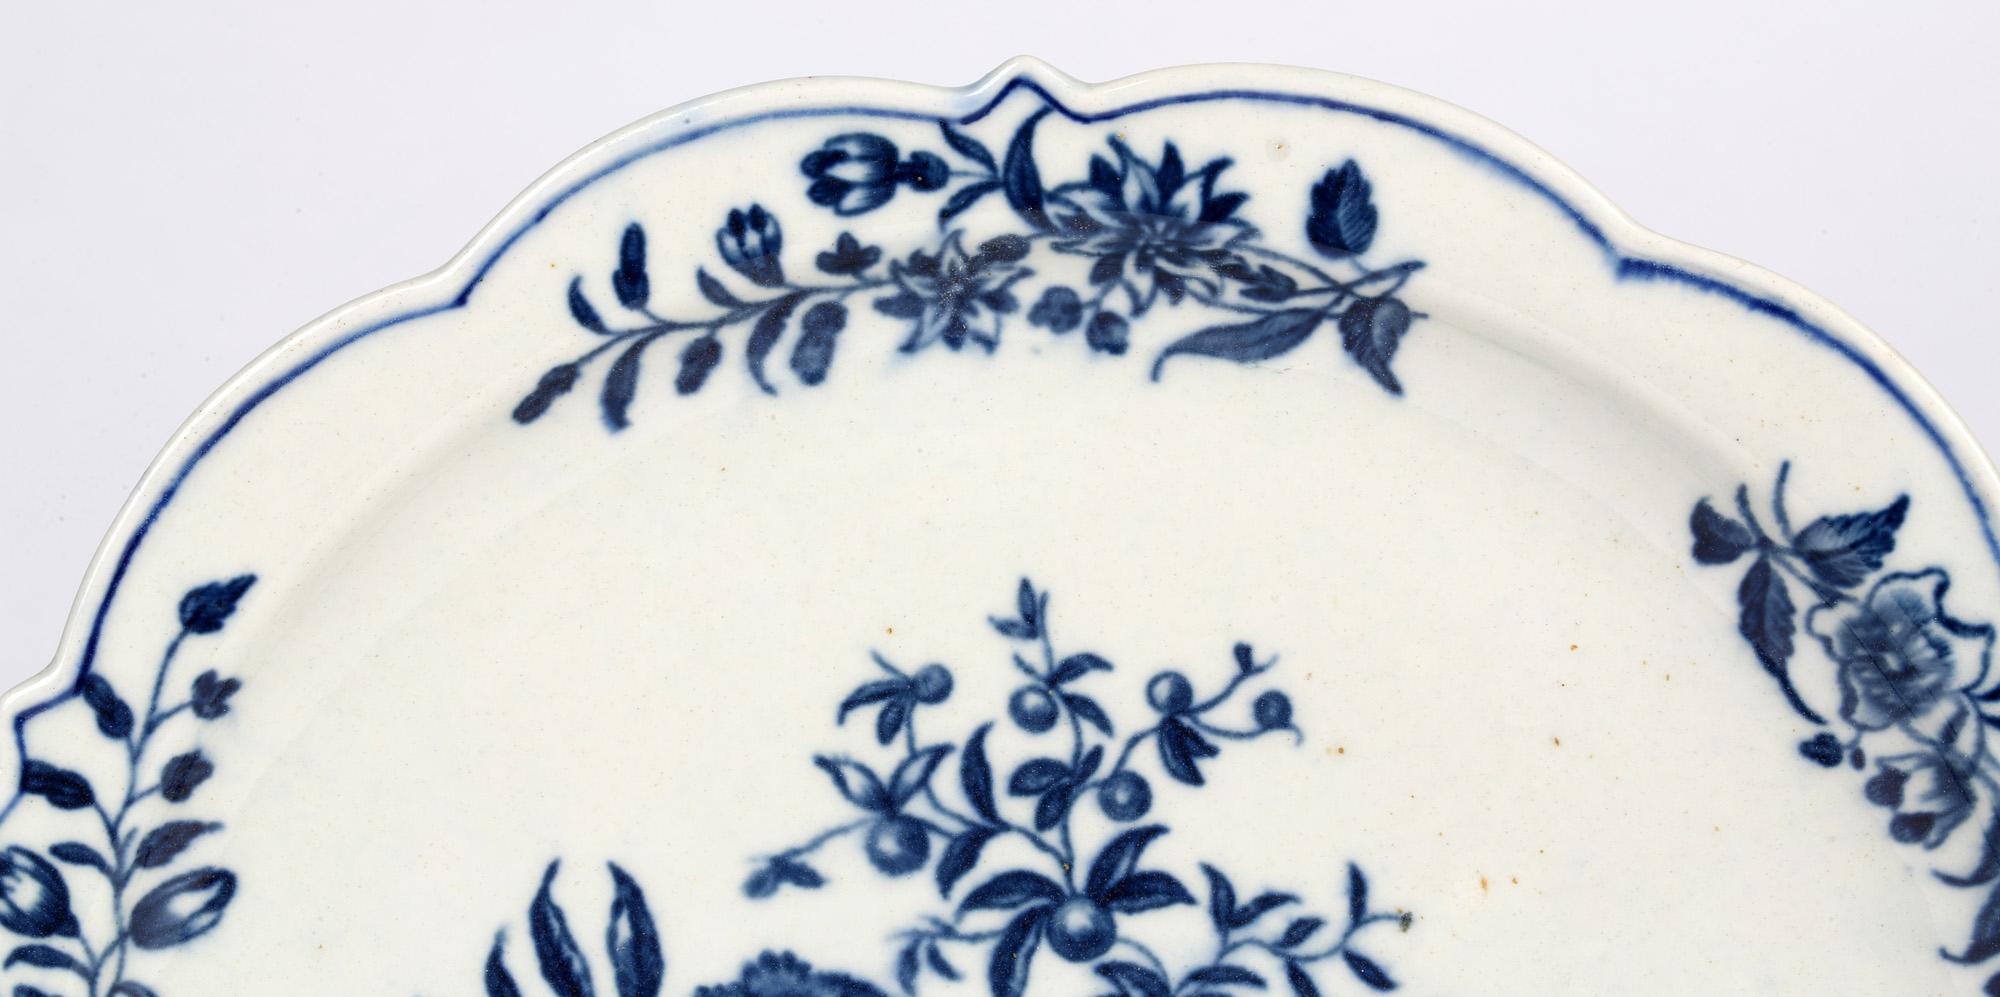 A fine antique Worcester early large Dr Wall period blue and white pine cone pattern plate dating from circa 1760. The rounded plate has a raised shaped rim and decorated with pine cones set amidst flowers with floral designs applied around the rim.